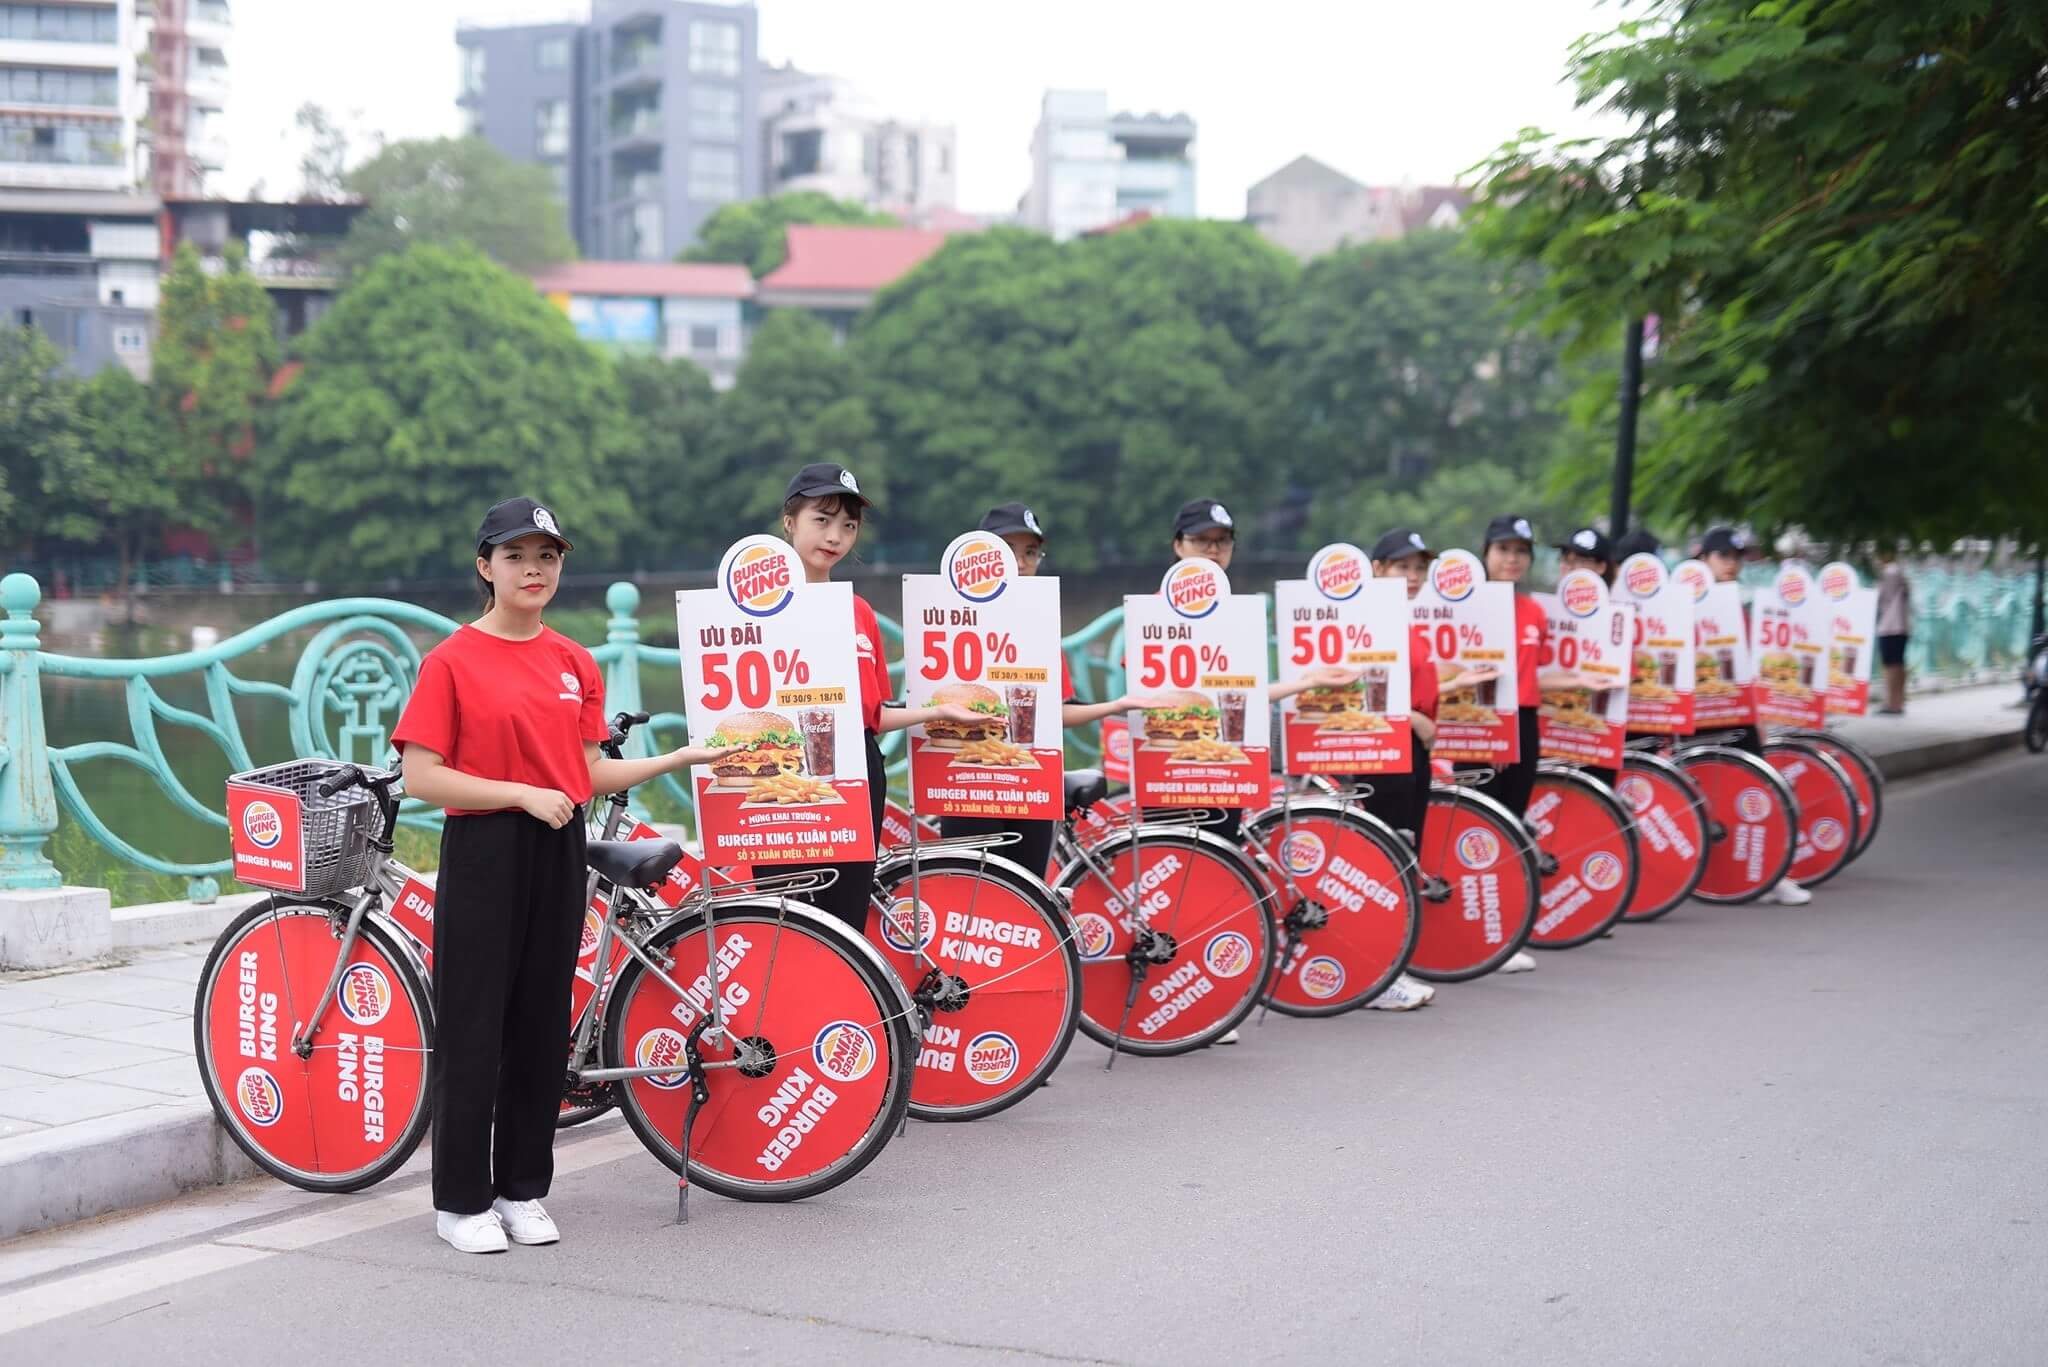 Activities of bicycle roadshows are taking place at crowded public streets